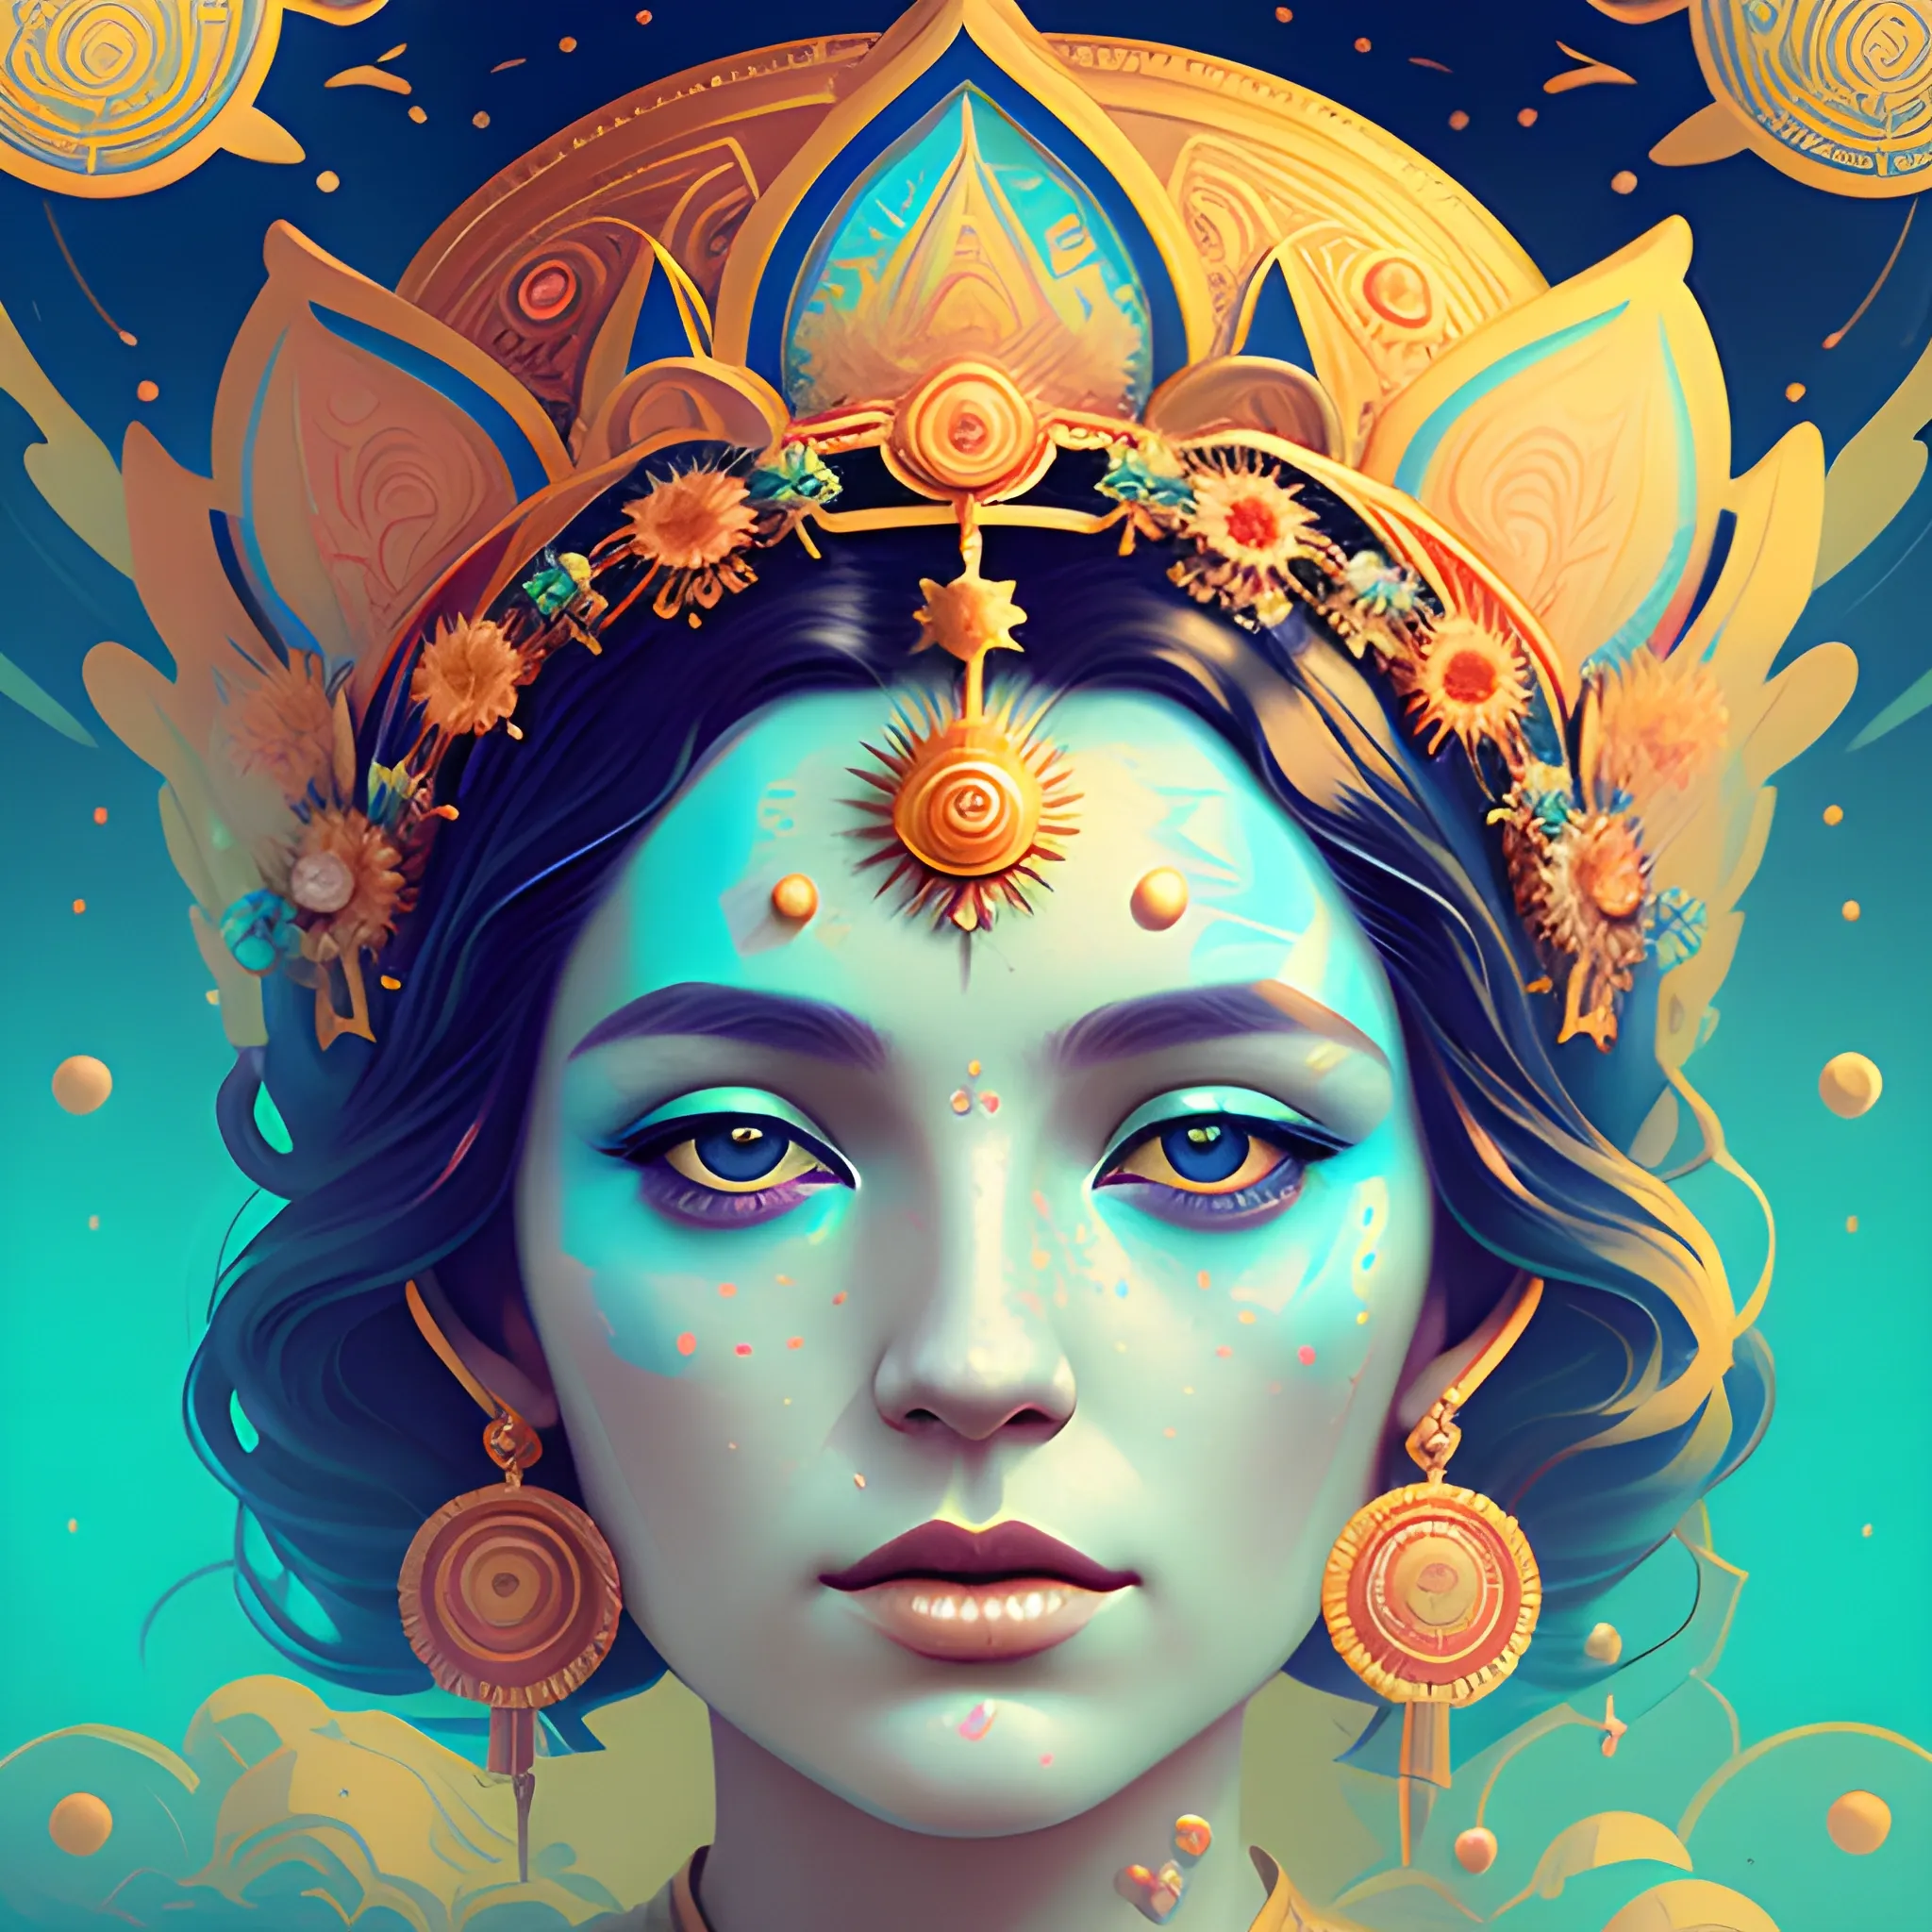 Flowery beautiful face empress or priestess  with gold jewellery, by petros afshar, ross tran, Tom Bagshaw, tom whalen, underwater bubbly psychedelic clouds, Anaglyph 3D lens blur effect